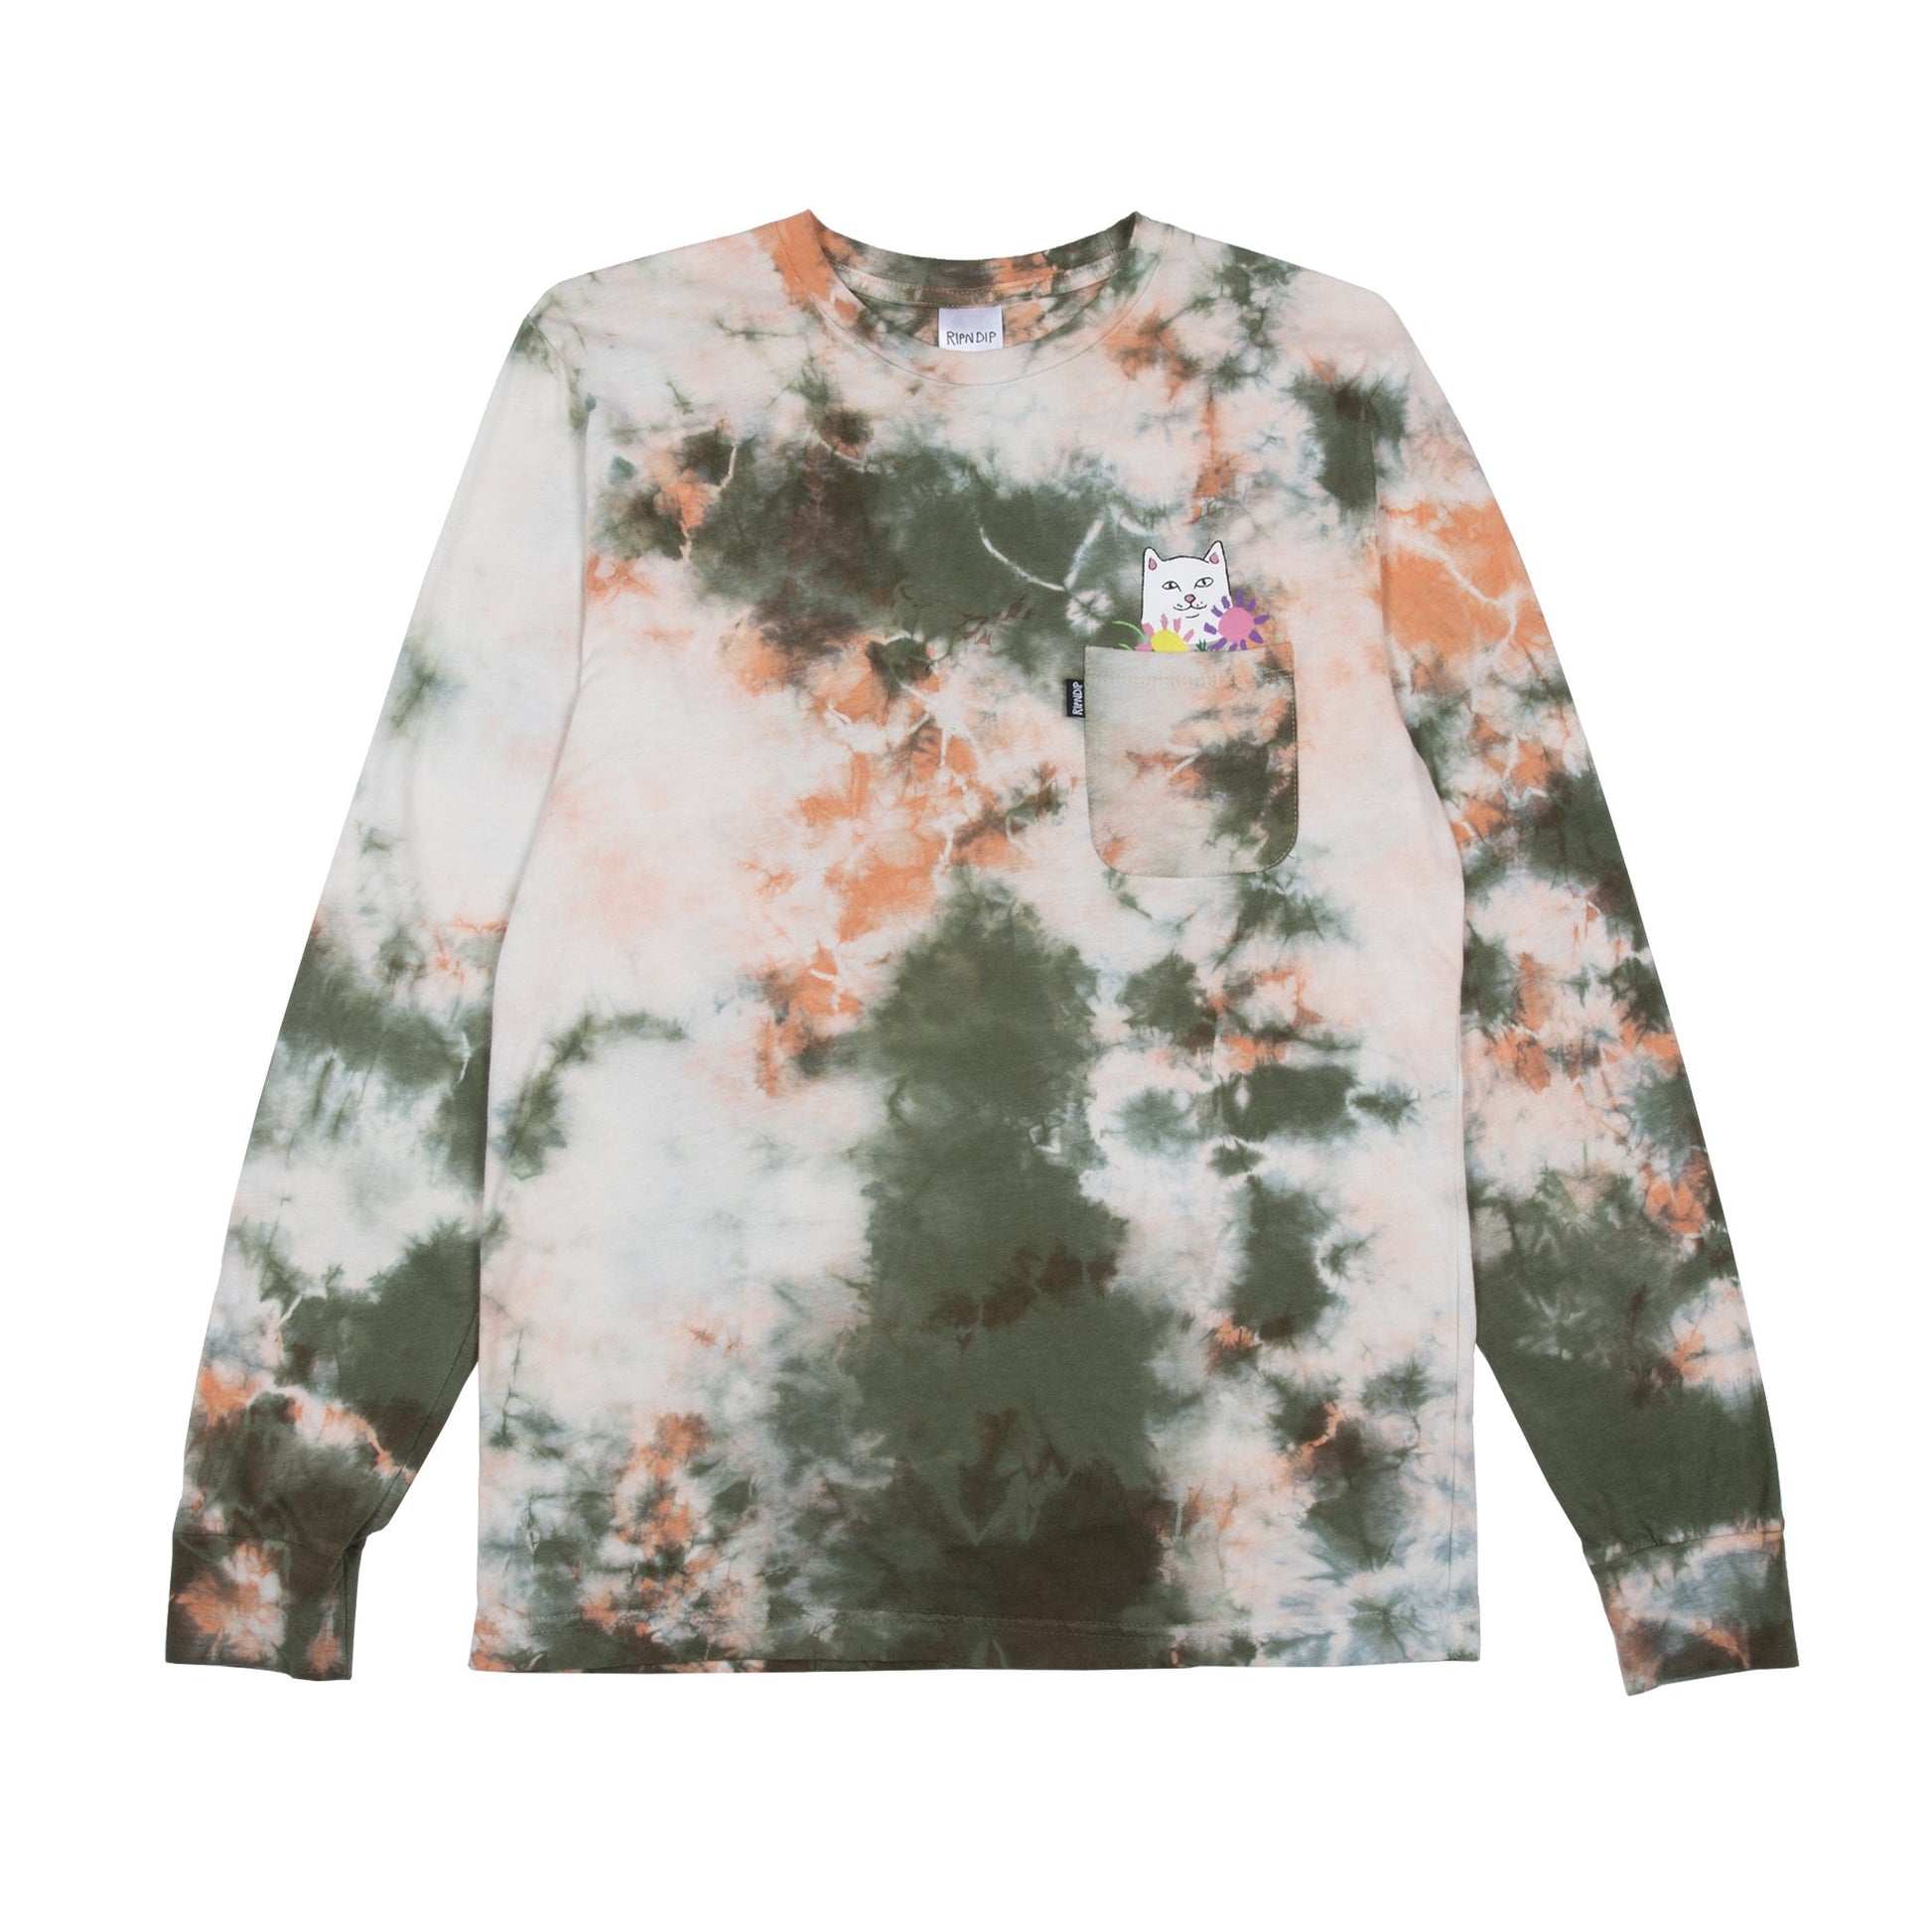 RIPNDIP - Flowers For Bae Men's L/S Tee, Green/Pink Acid Wash - The Giant Peach